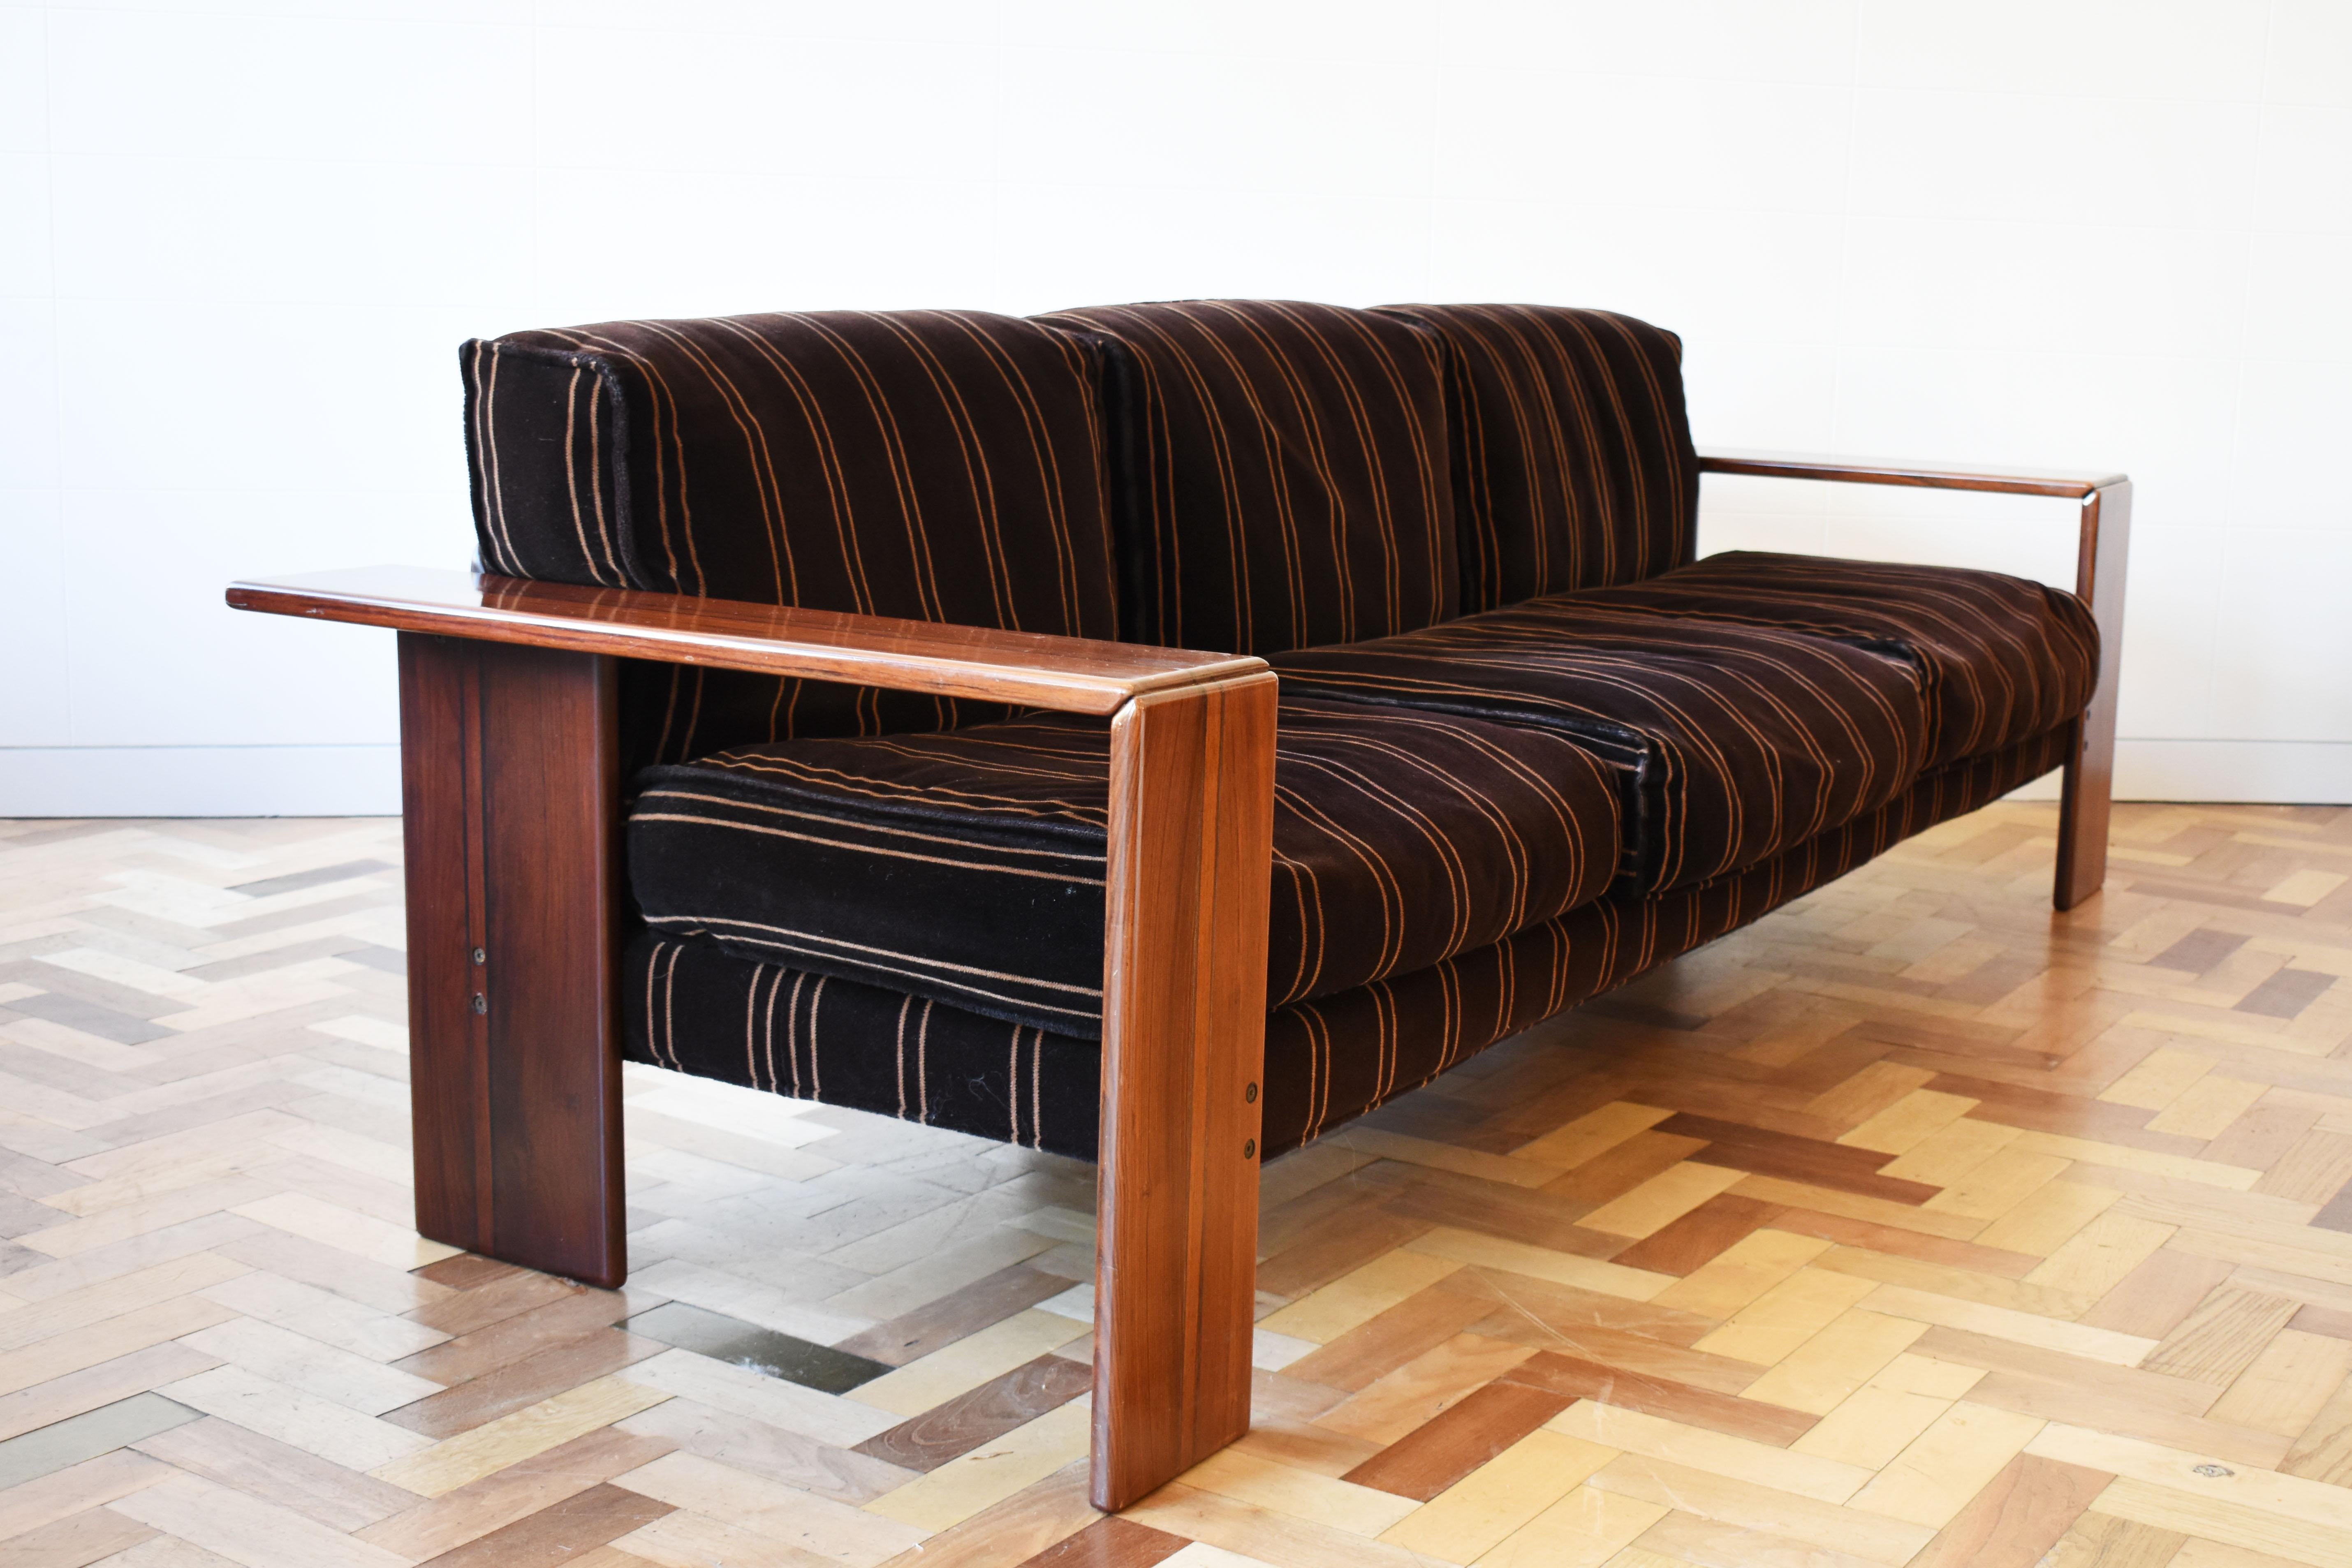 This is a fabulous Italian Artona sofa by Tobia & Afra Scarpa for Maxalto, 1970's.

This beautiful sofa is characterized by rosewood frame and pinstripe inlays, the cushions are removable and made of chocolate brown mohair velvet with beige stripes.